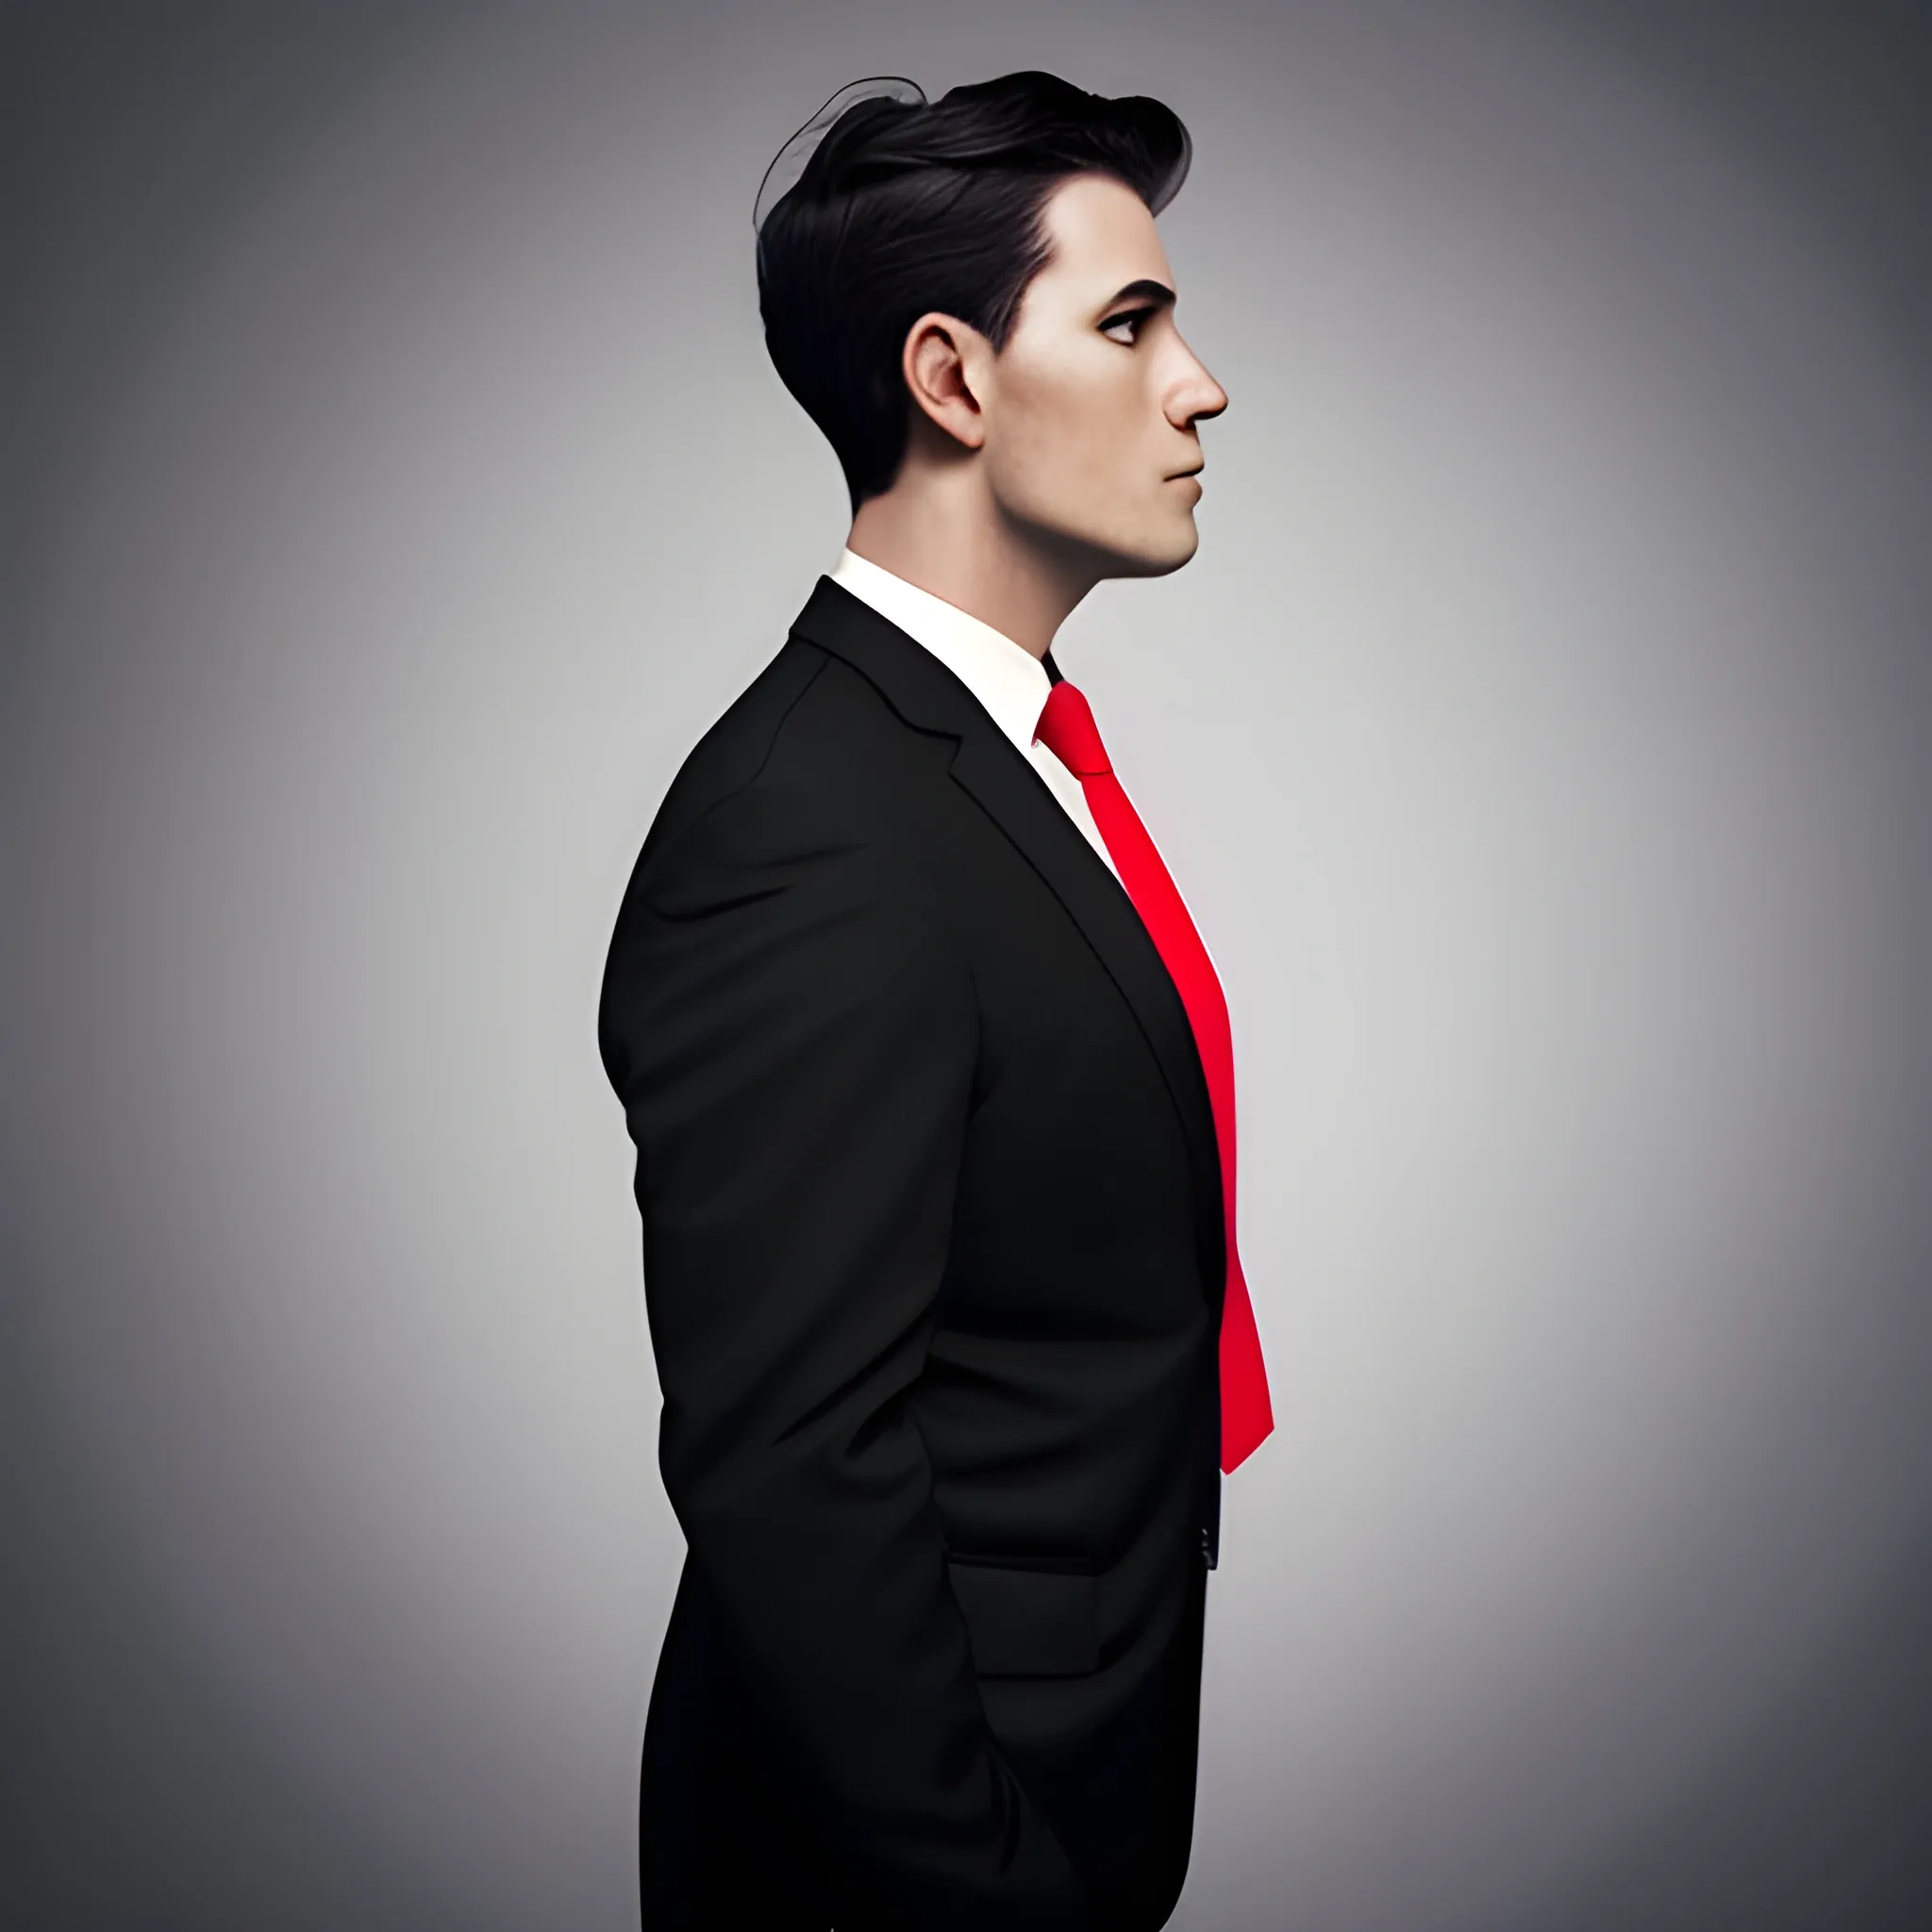 Can you wear a blue shirt, black suit and red tie? - Quora